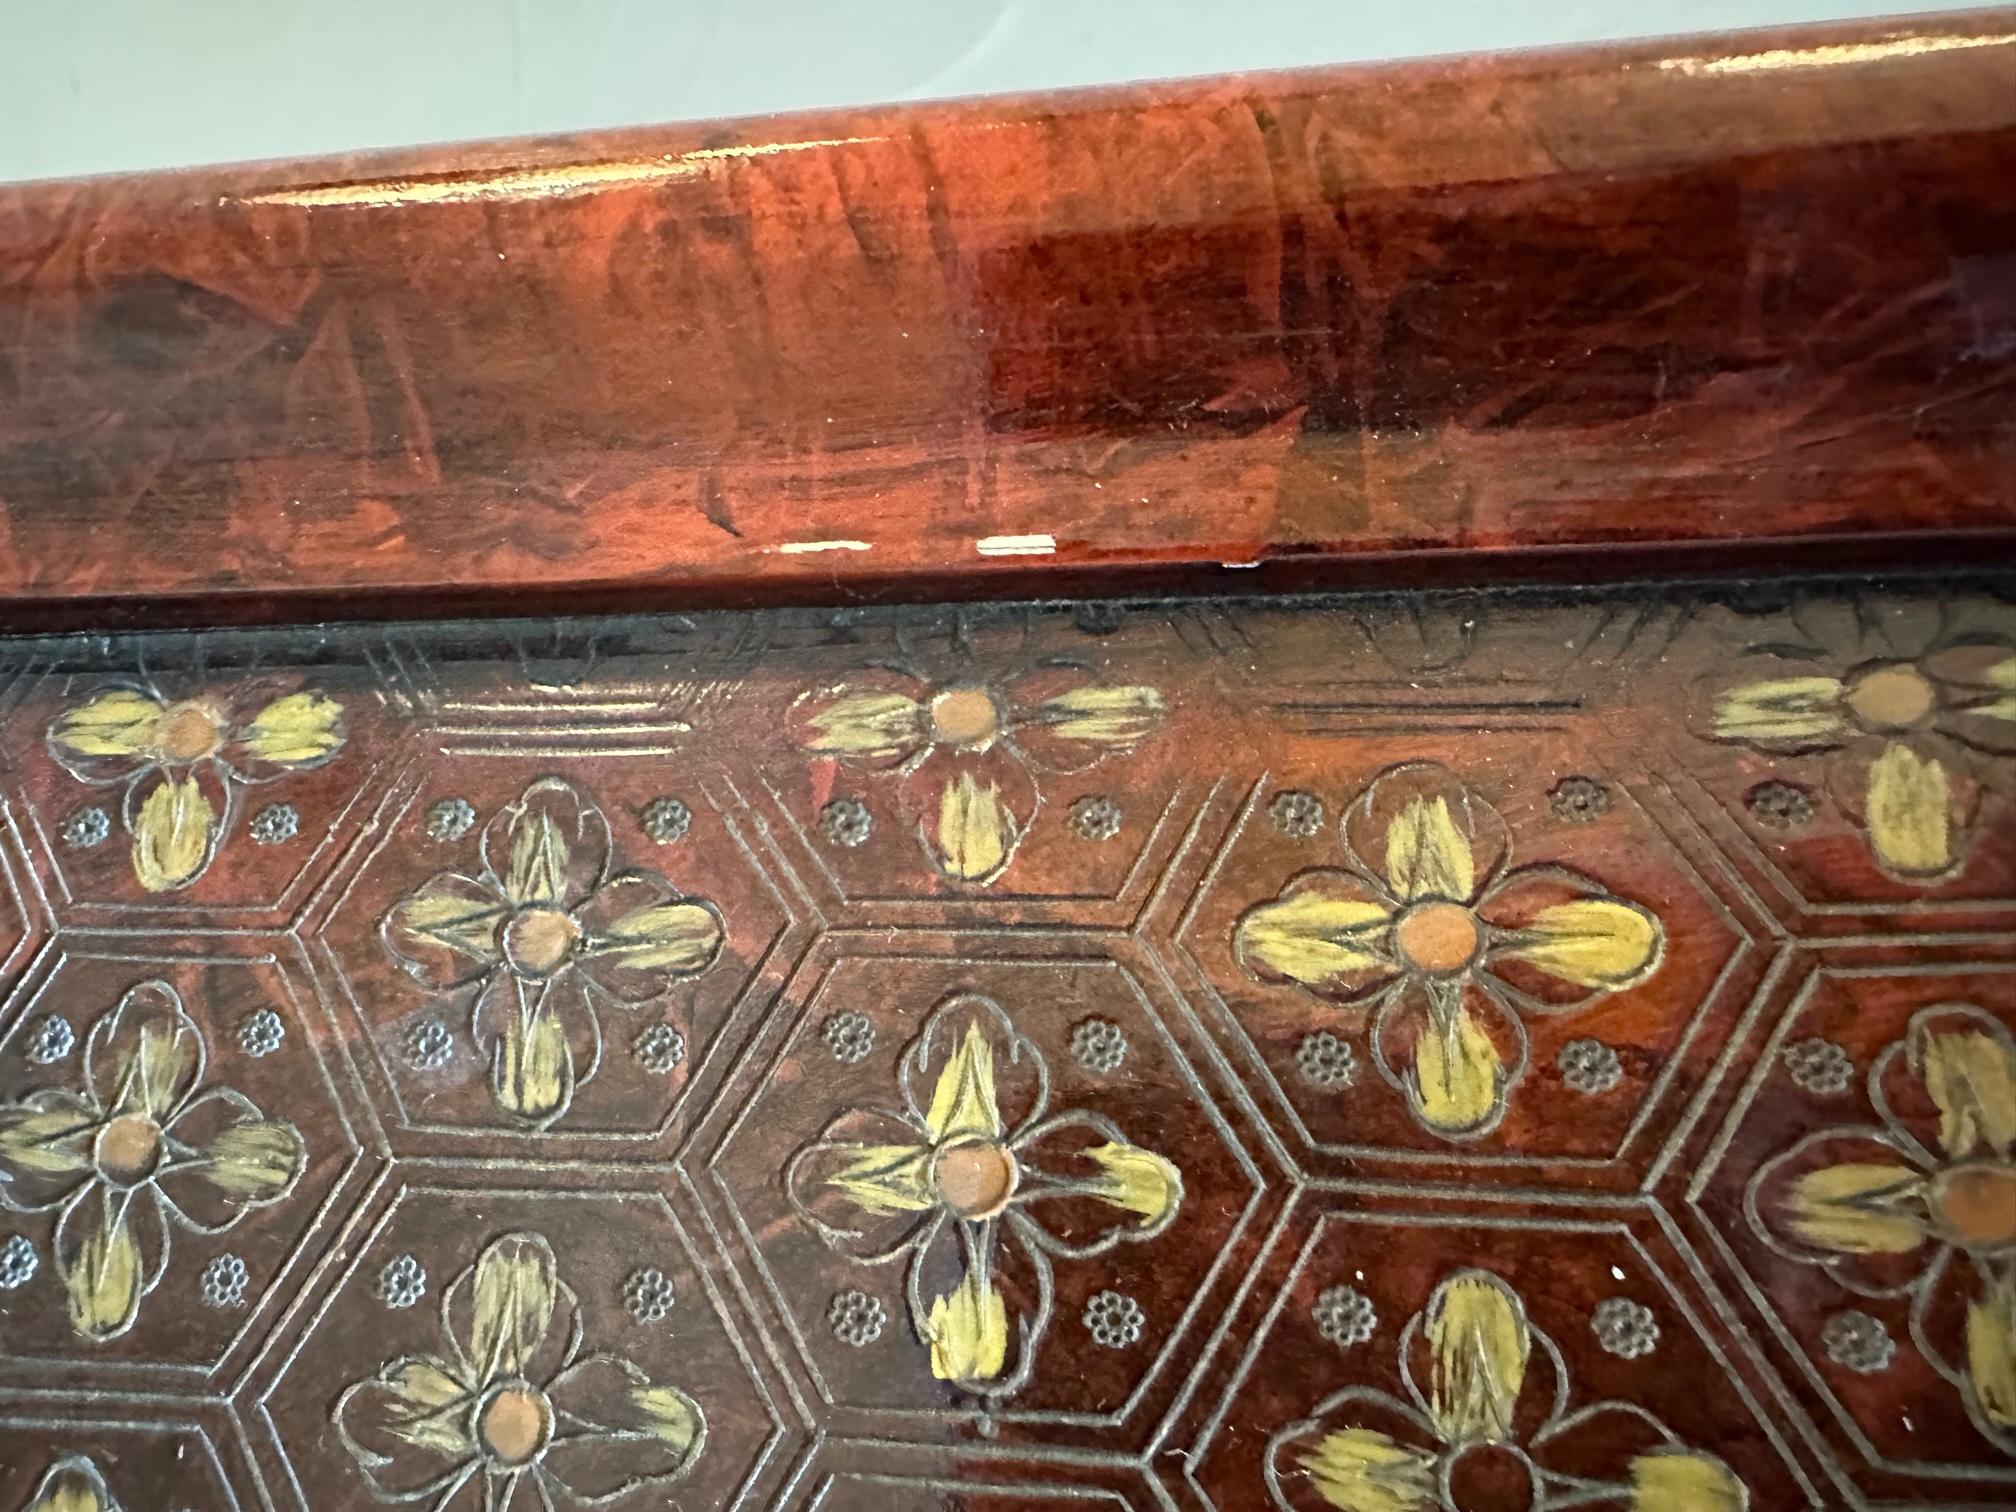 Stunning large square carved wood coffee table by John Widdicomb having an Asian flair in a marvelous shade of dark reddish brown. Carvings are detailed with gilding and are a beautiful array of flowers, unicorns and flying mythological creatures.